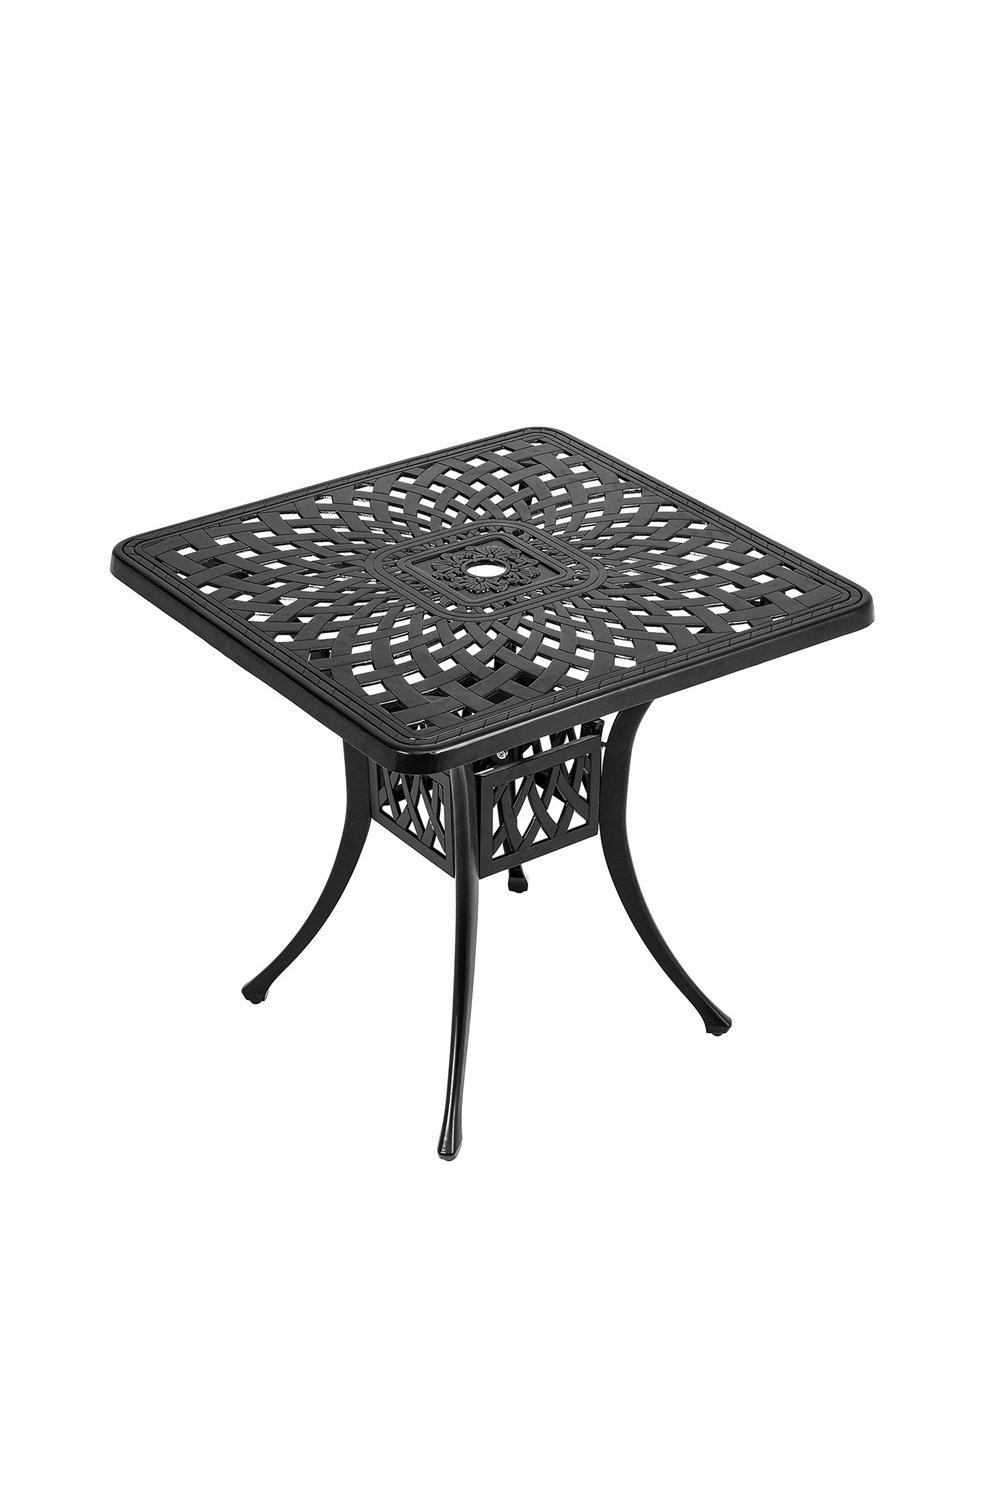 Black Square Outdoor Garden Dining Table